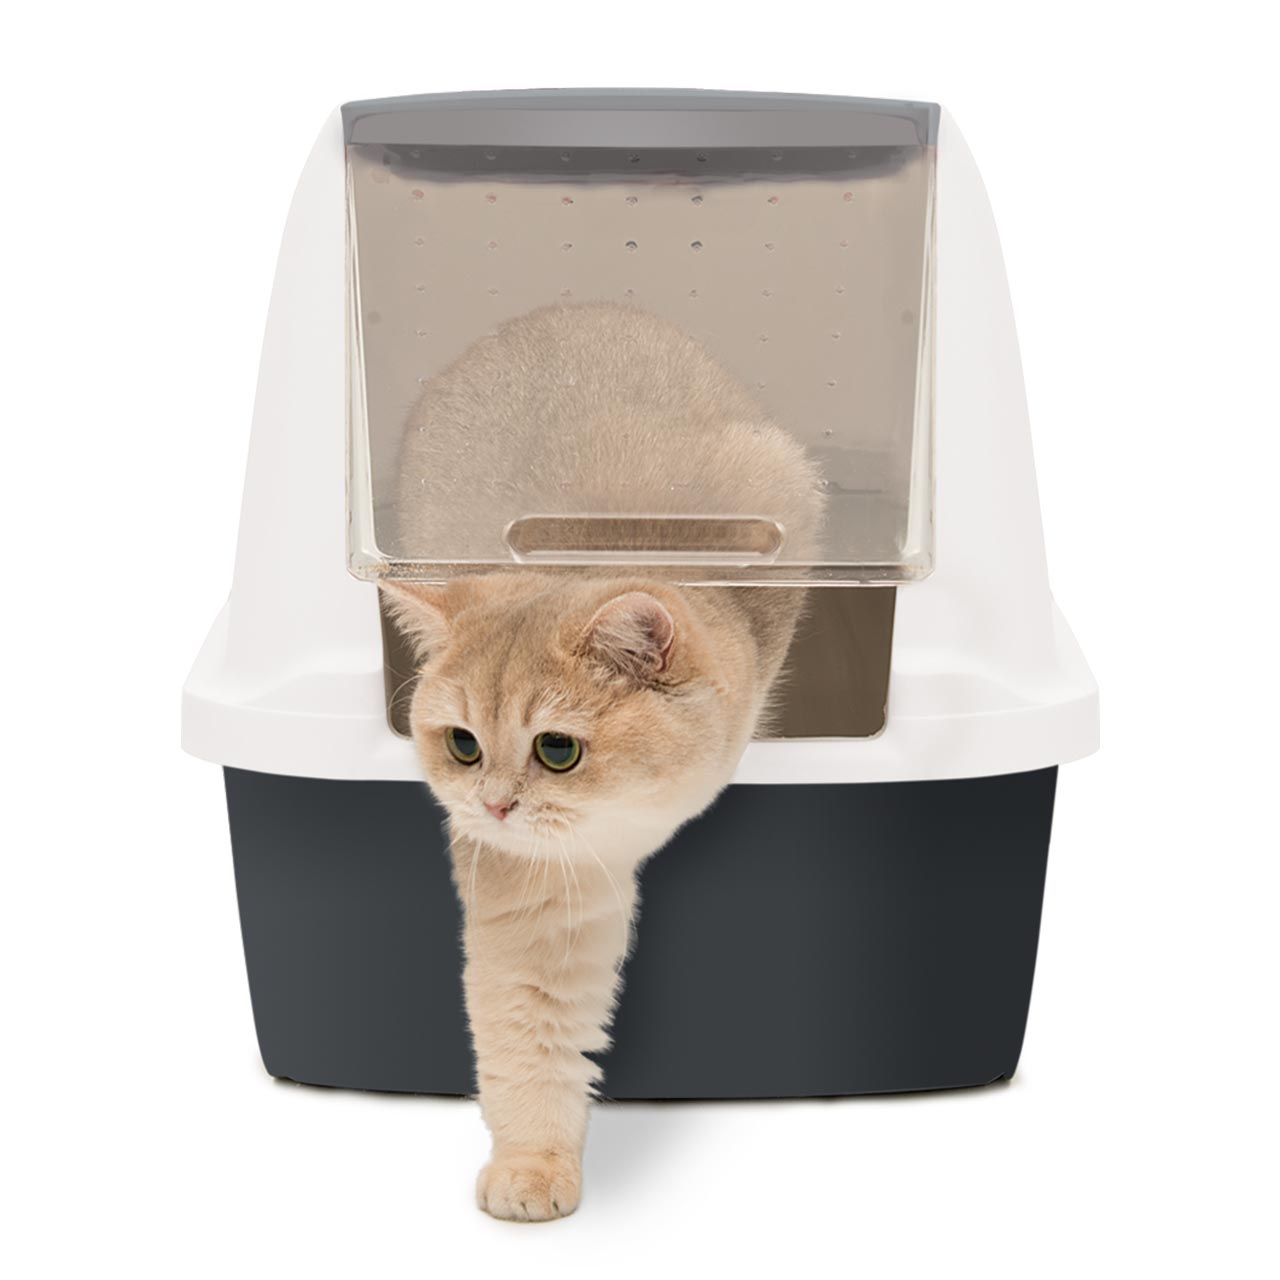 Spacious hooded litter box with paw-safe front door